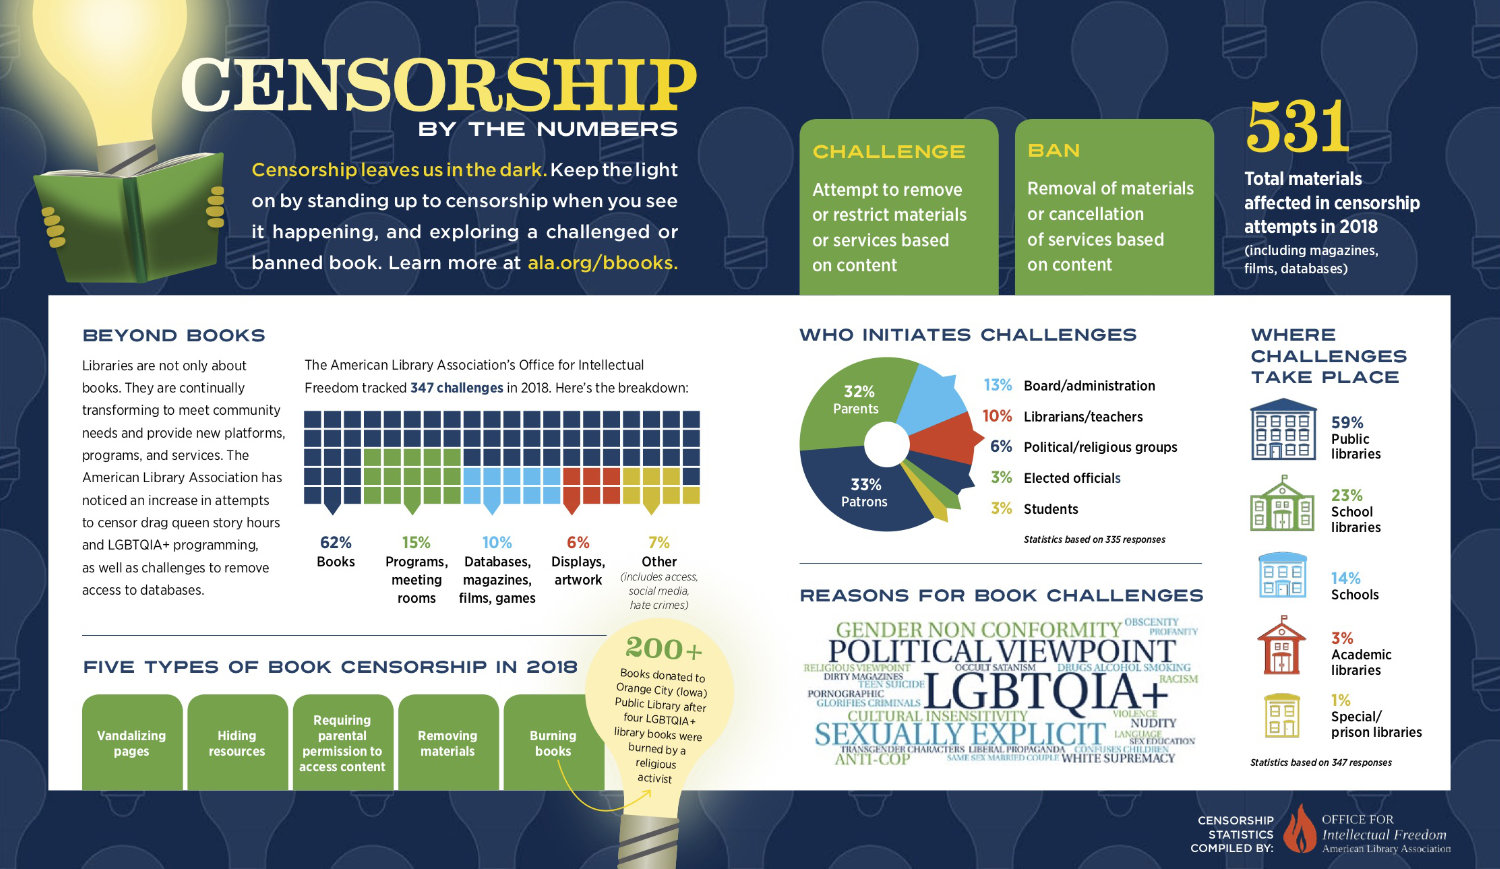 Censorship by the numbers (infographic)